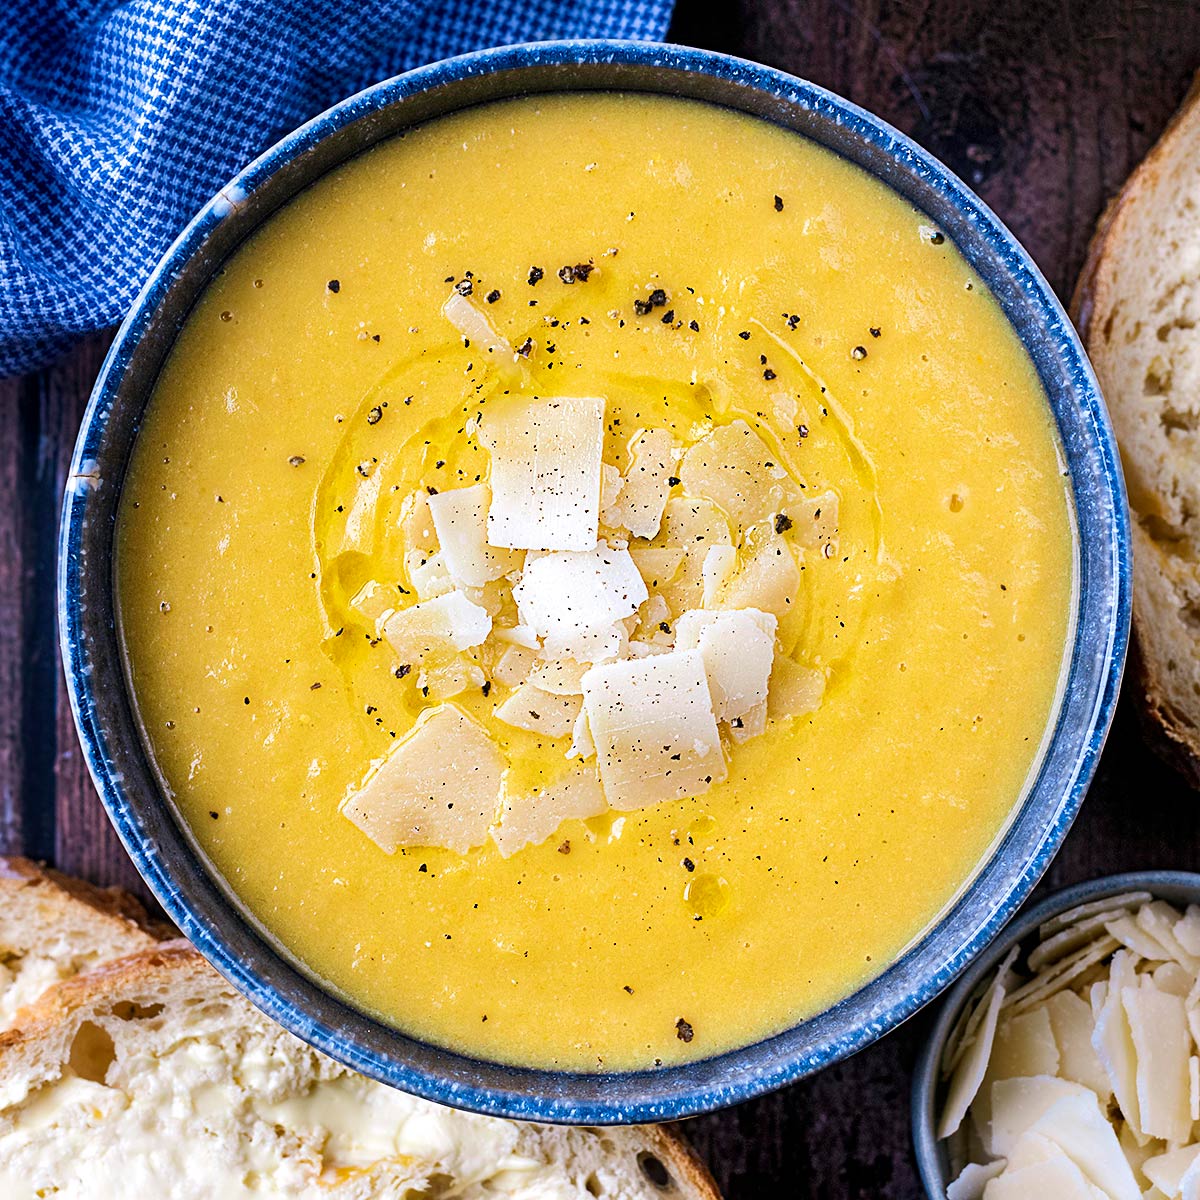 https://hungryhealthyhappy.com/wp-content/uploads/2021/05/Creamy-Vegetable-Soup-featured.jpg